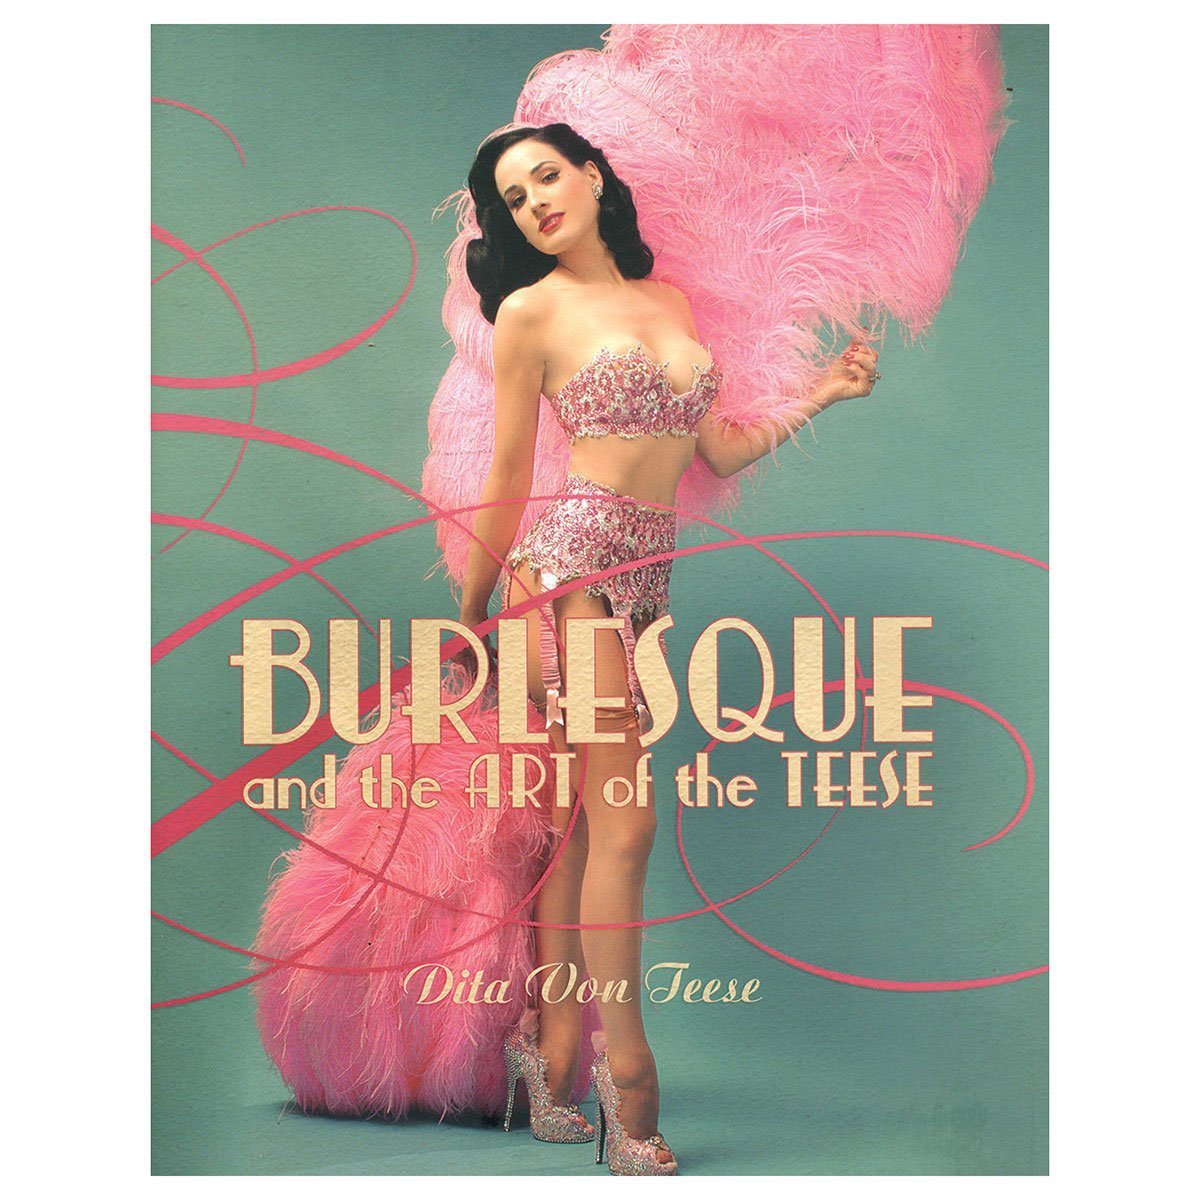 Burlesque & the Art of the Teese - Kink Store